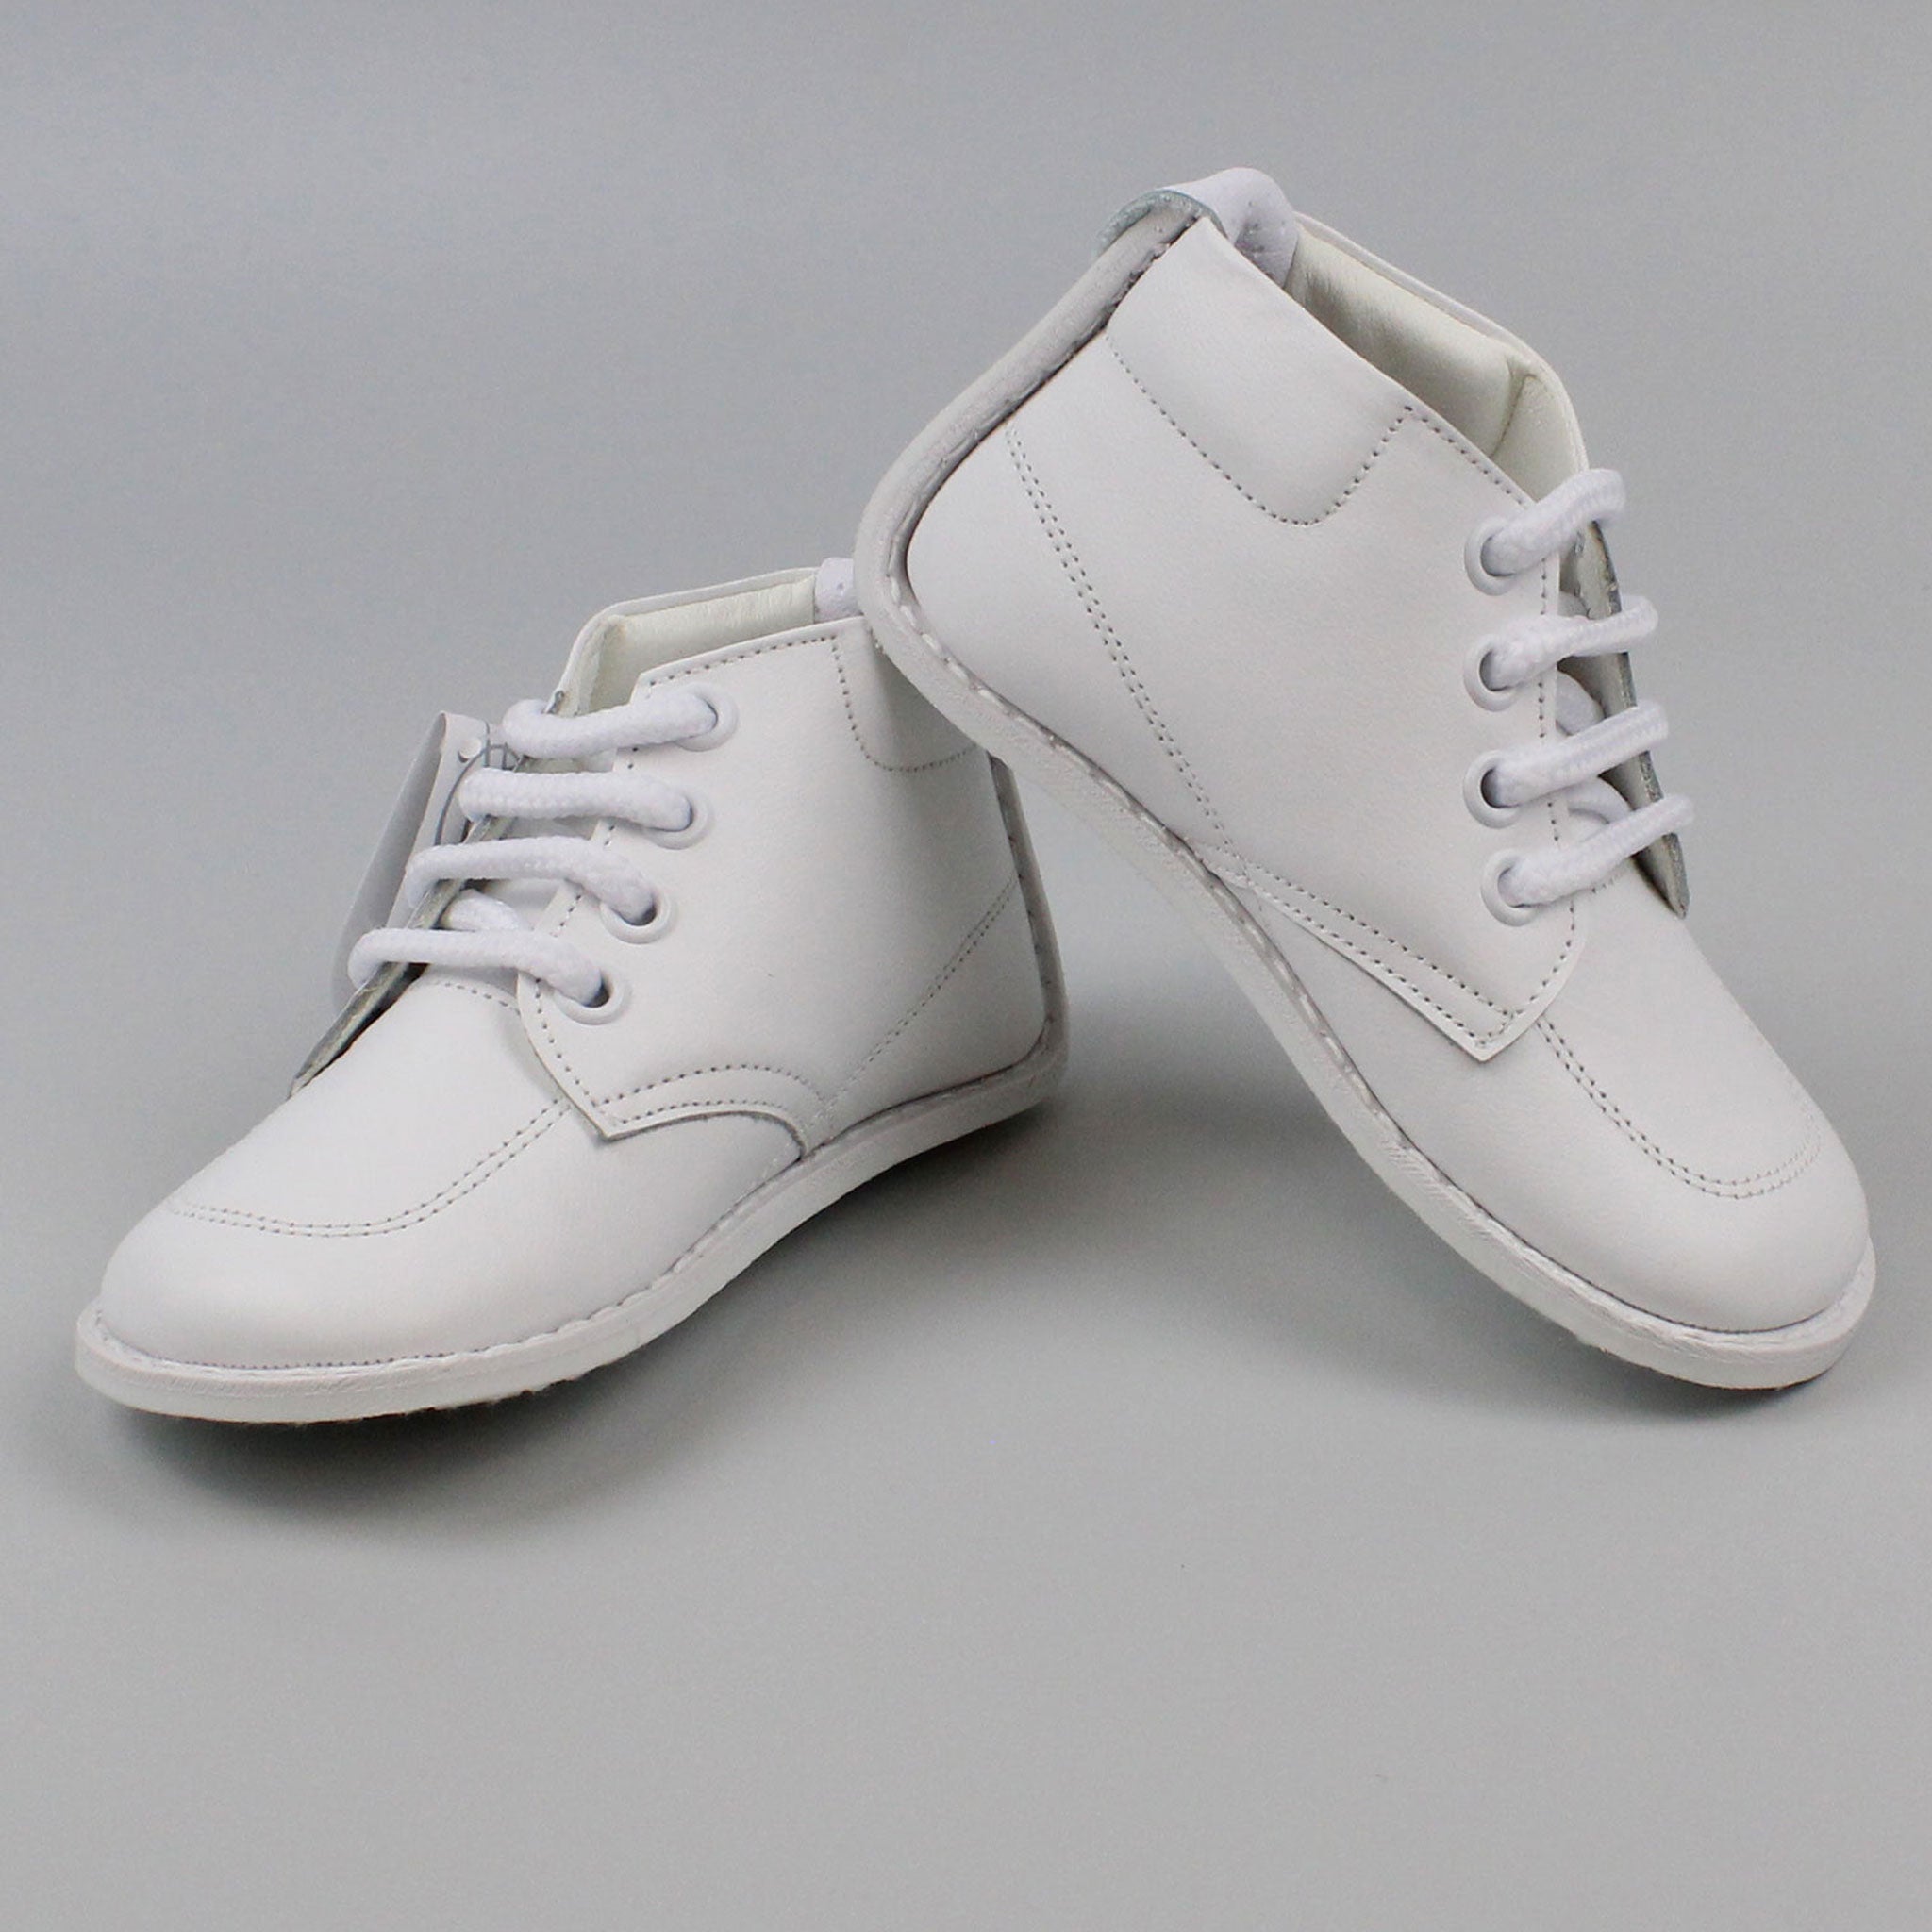 Baby Boys White Leather Boots